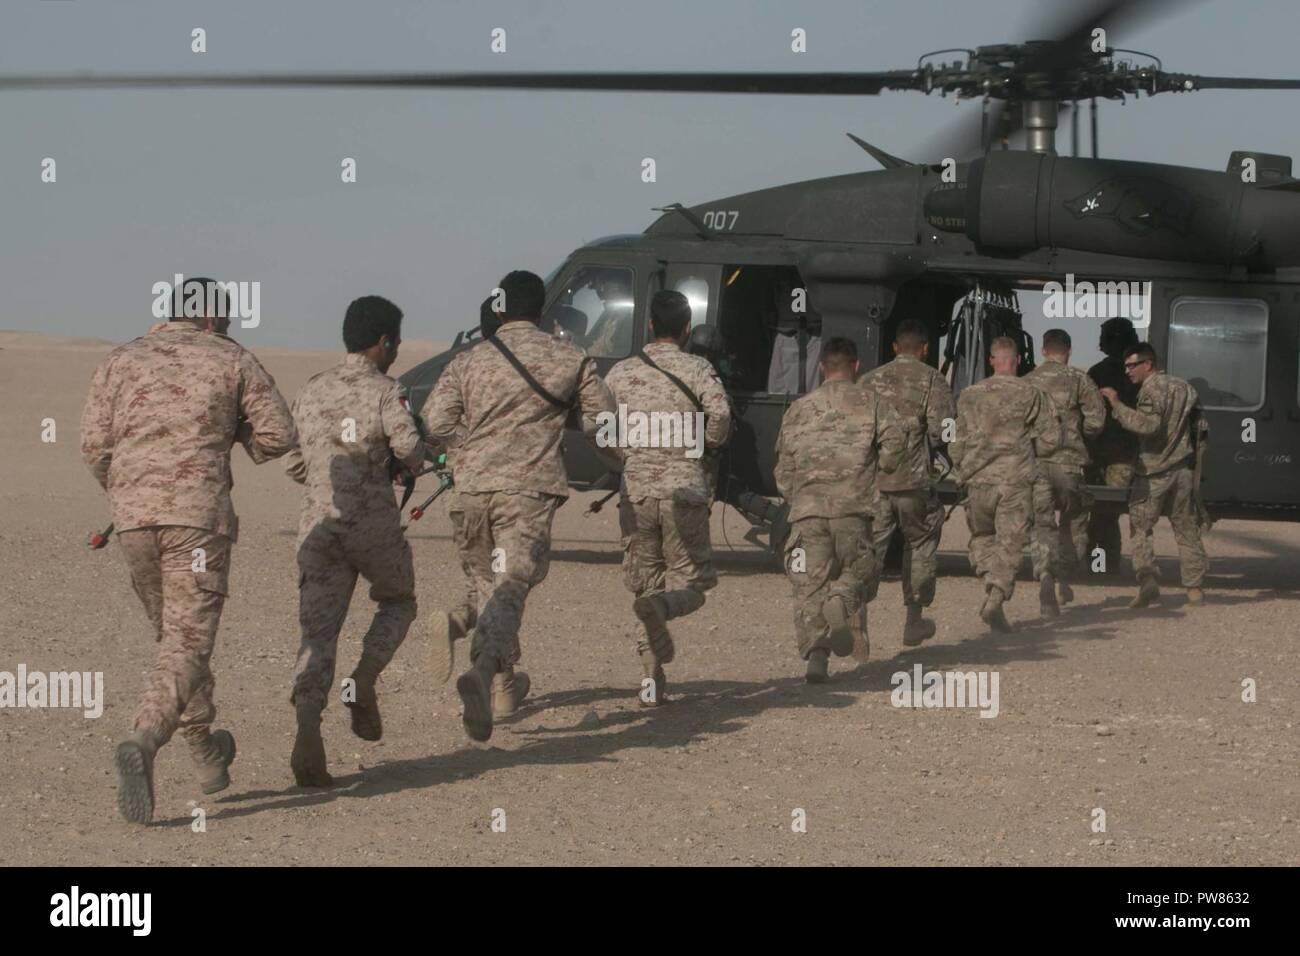 Soldiers From The 2nd Battalion 7th Cavalry Regiment Ghost 3rd Armored Brigade Combat Team 1st Cavalry Division And Kuwait S 55th Battalion 26th Brigade The Wall Brigade Practice Mounting And Dismounting A Uh 60